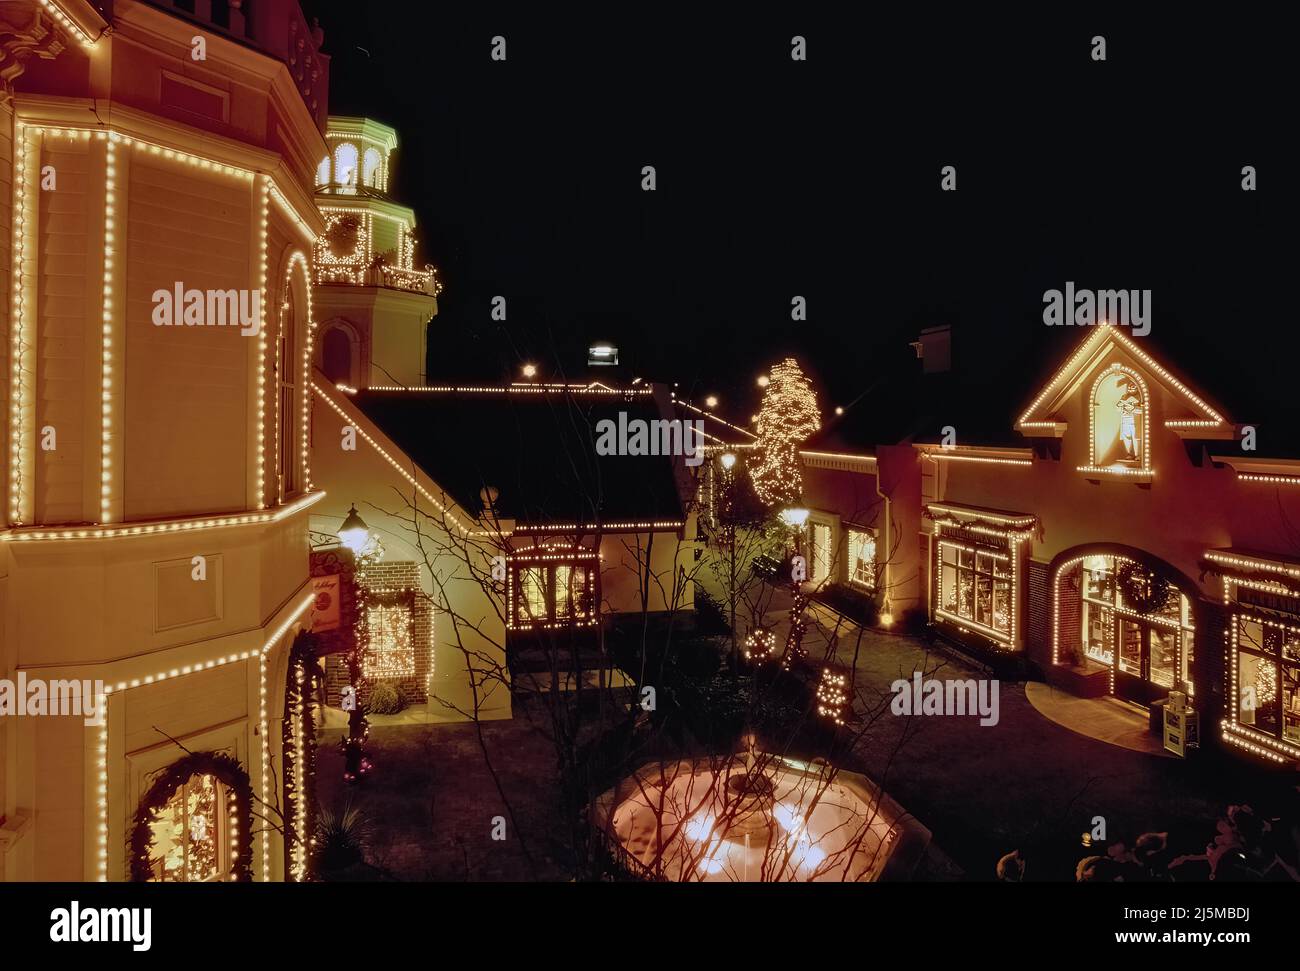 Branson, Missouri USA December 4, 1993: The Grand Village Shopping Center in Branson, Missouri at Christmas time gives an old time flavor to shopping. Stock Photo